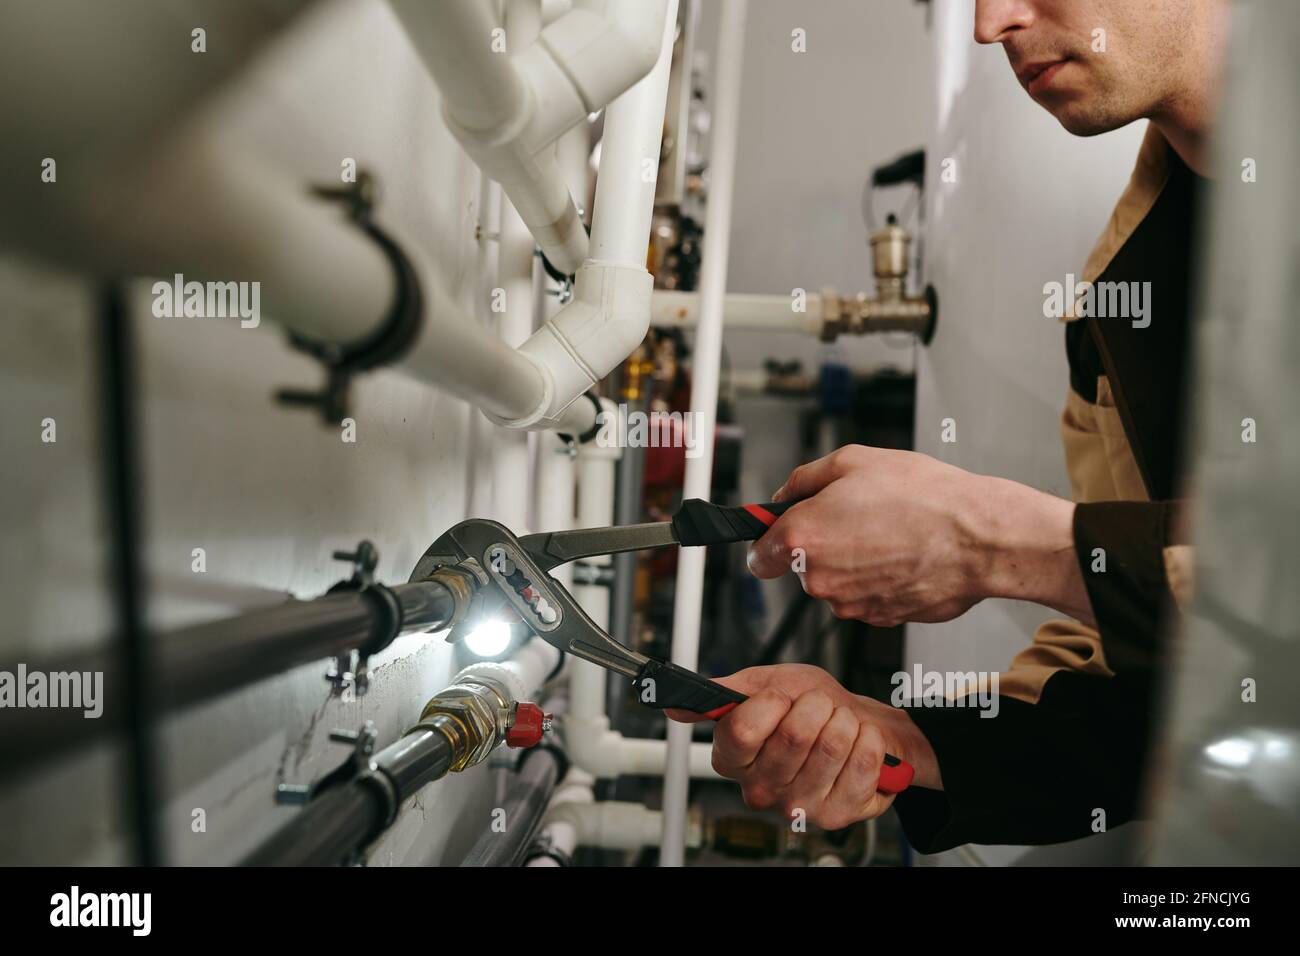 Repairman using a tool to fix parts of pipes during work Stock Photo